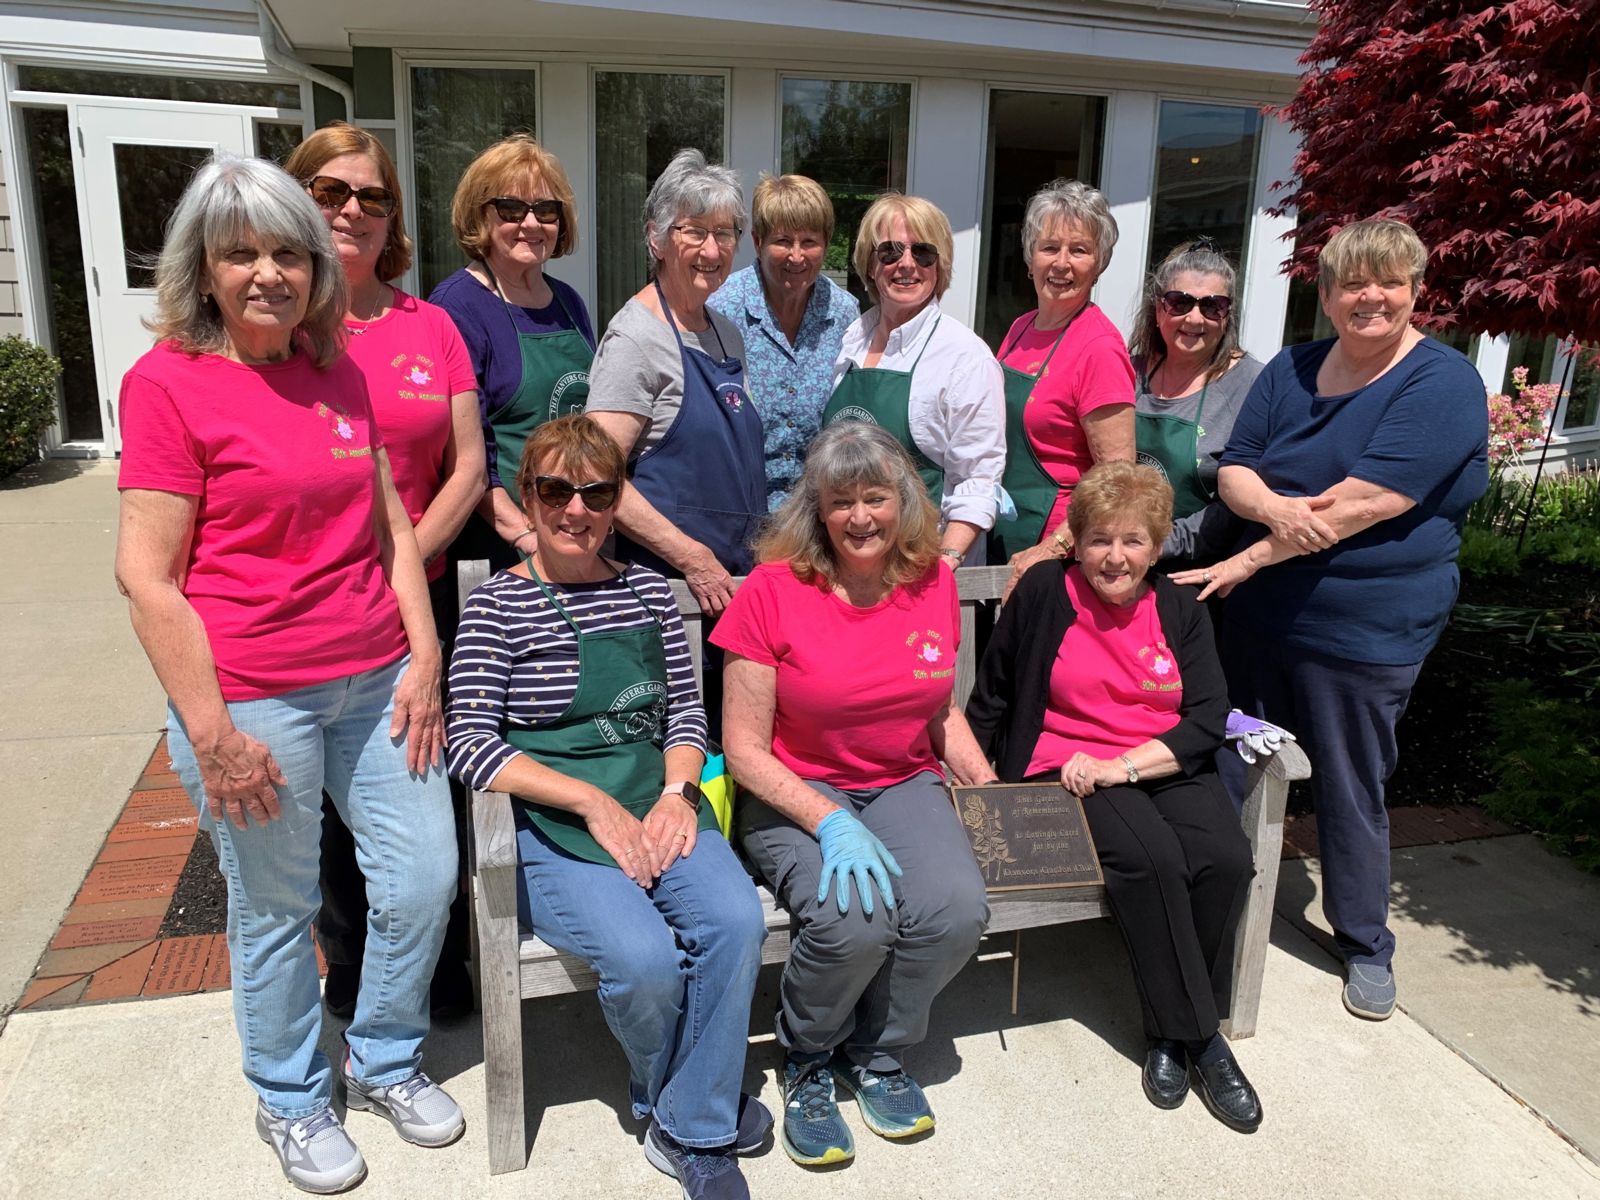 The Danvers Garden Club volunteers at the Kaplan Family Hospice House: back row, L to R: Club President Lori Estes, Vice President Ann Farley, Marguerite Parkman, Kathe Hyland, Anne Sweeney, Judy Drouin, Lauren Yeannakopoulos. Front row: Mary Giangregorio, standing left; Patty Chisholm, Joni Pesola and Evie Fraser seated on bench; and Nancy Sweeter, standing right.